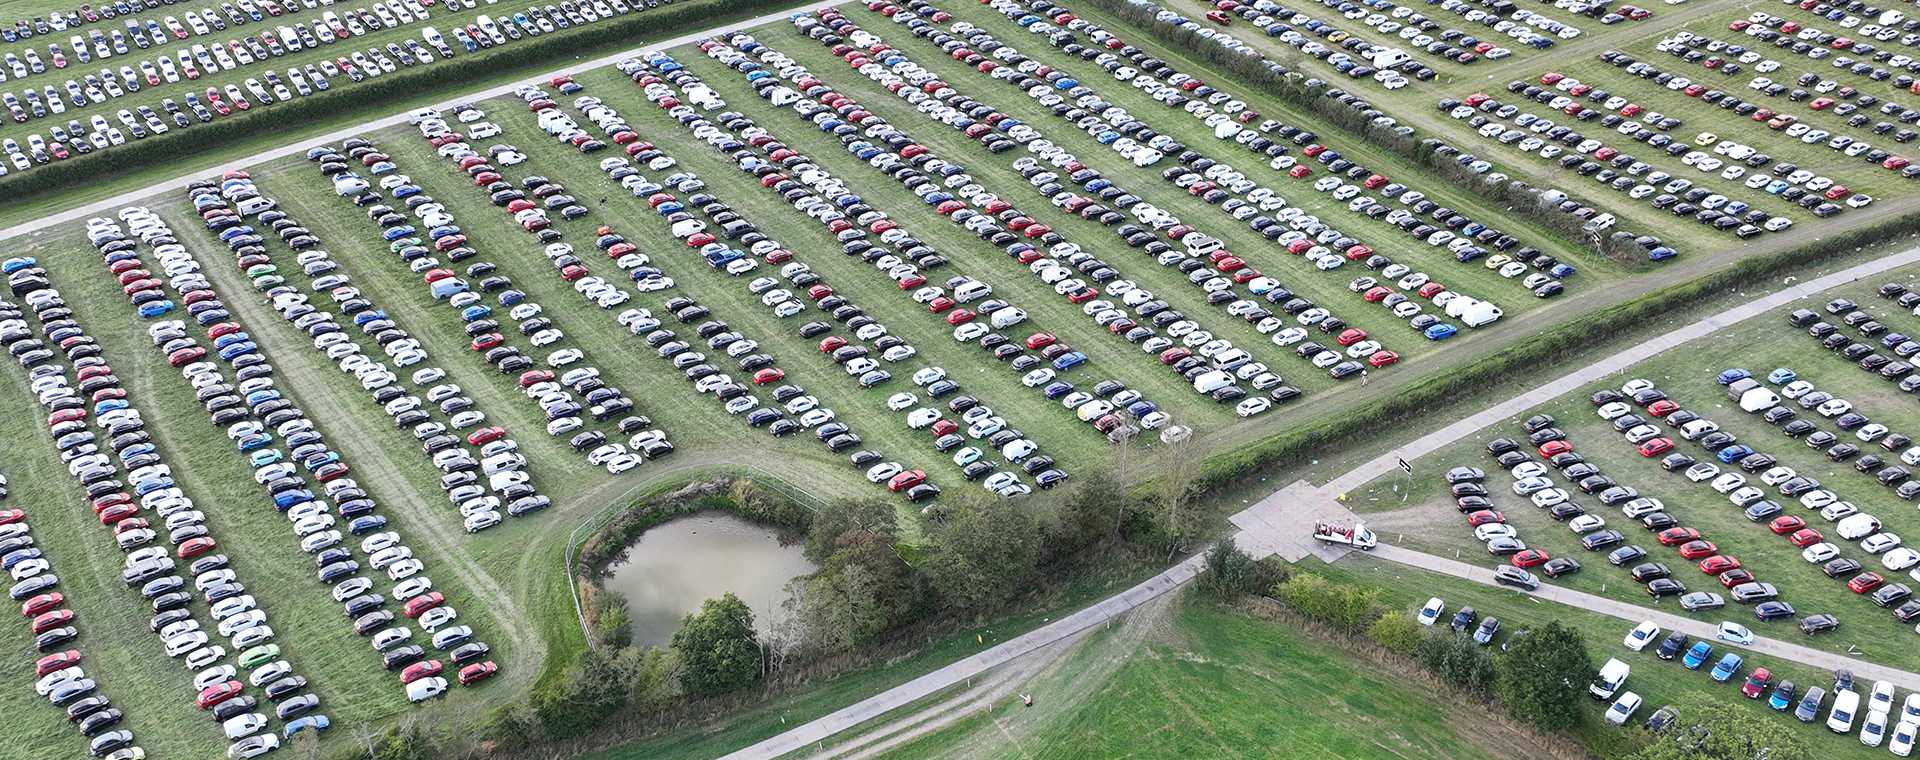 Aerial photograph of cars parked in a field